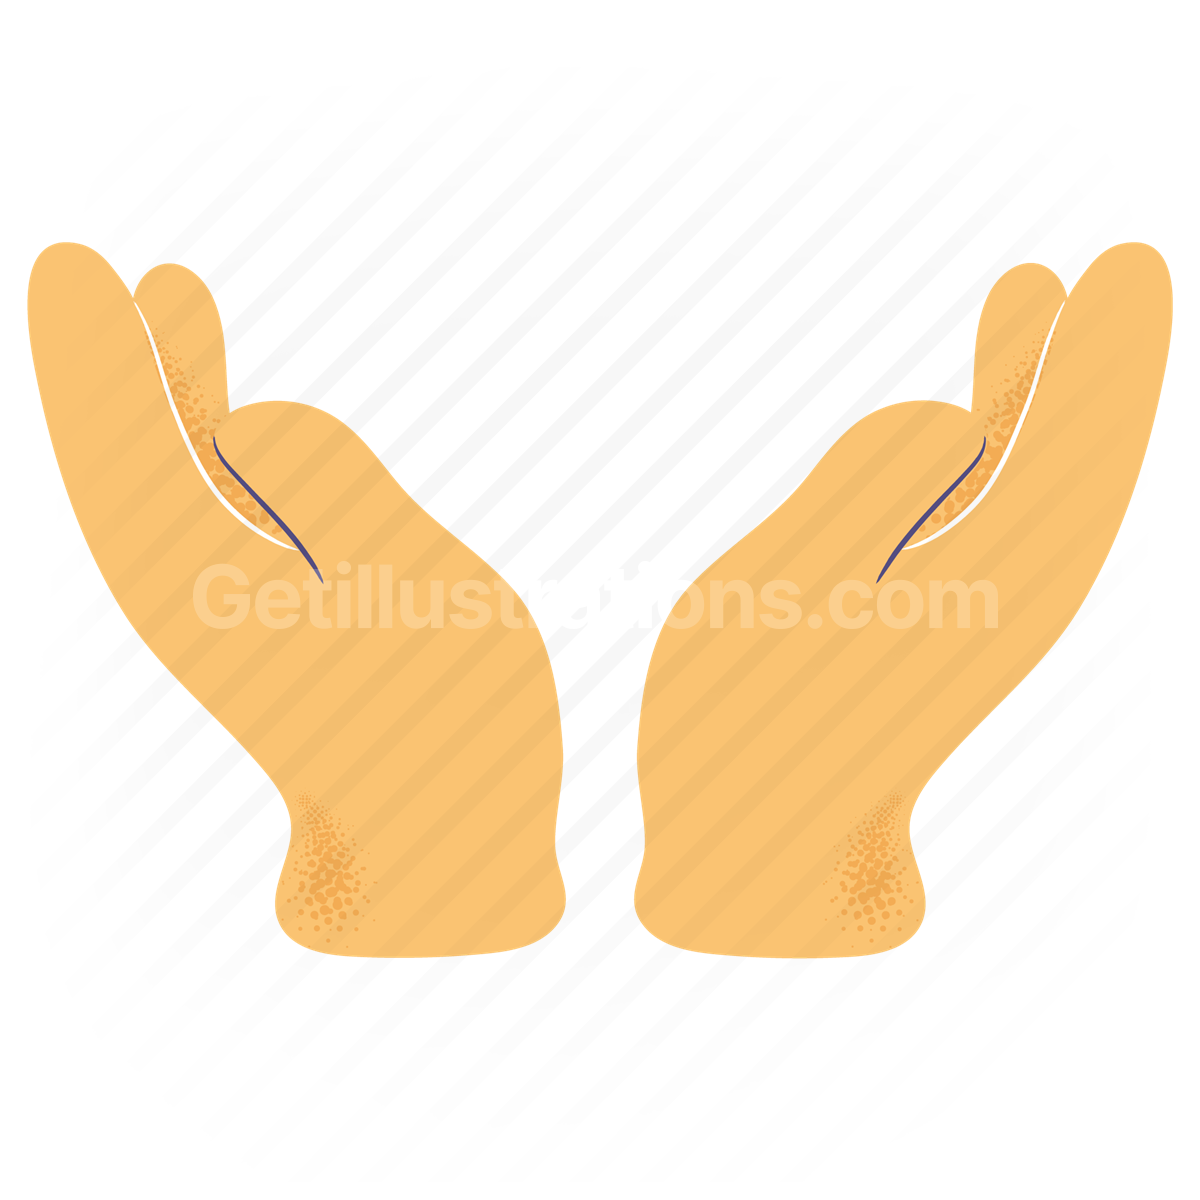 hand gesture, gesture, hand, sign, gesturing, hands, share, carry